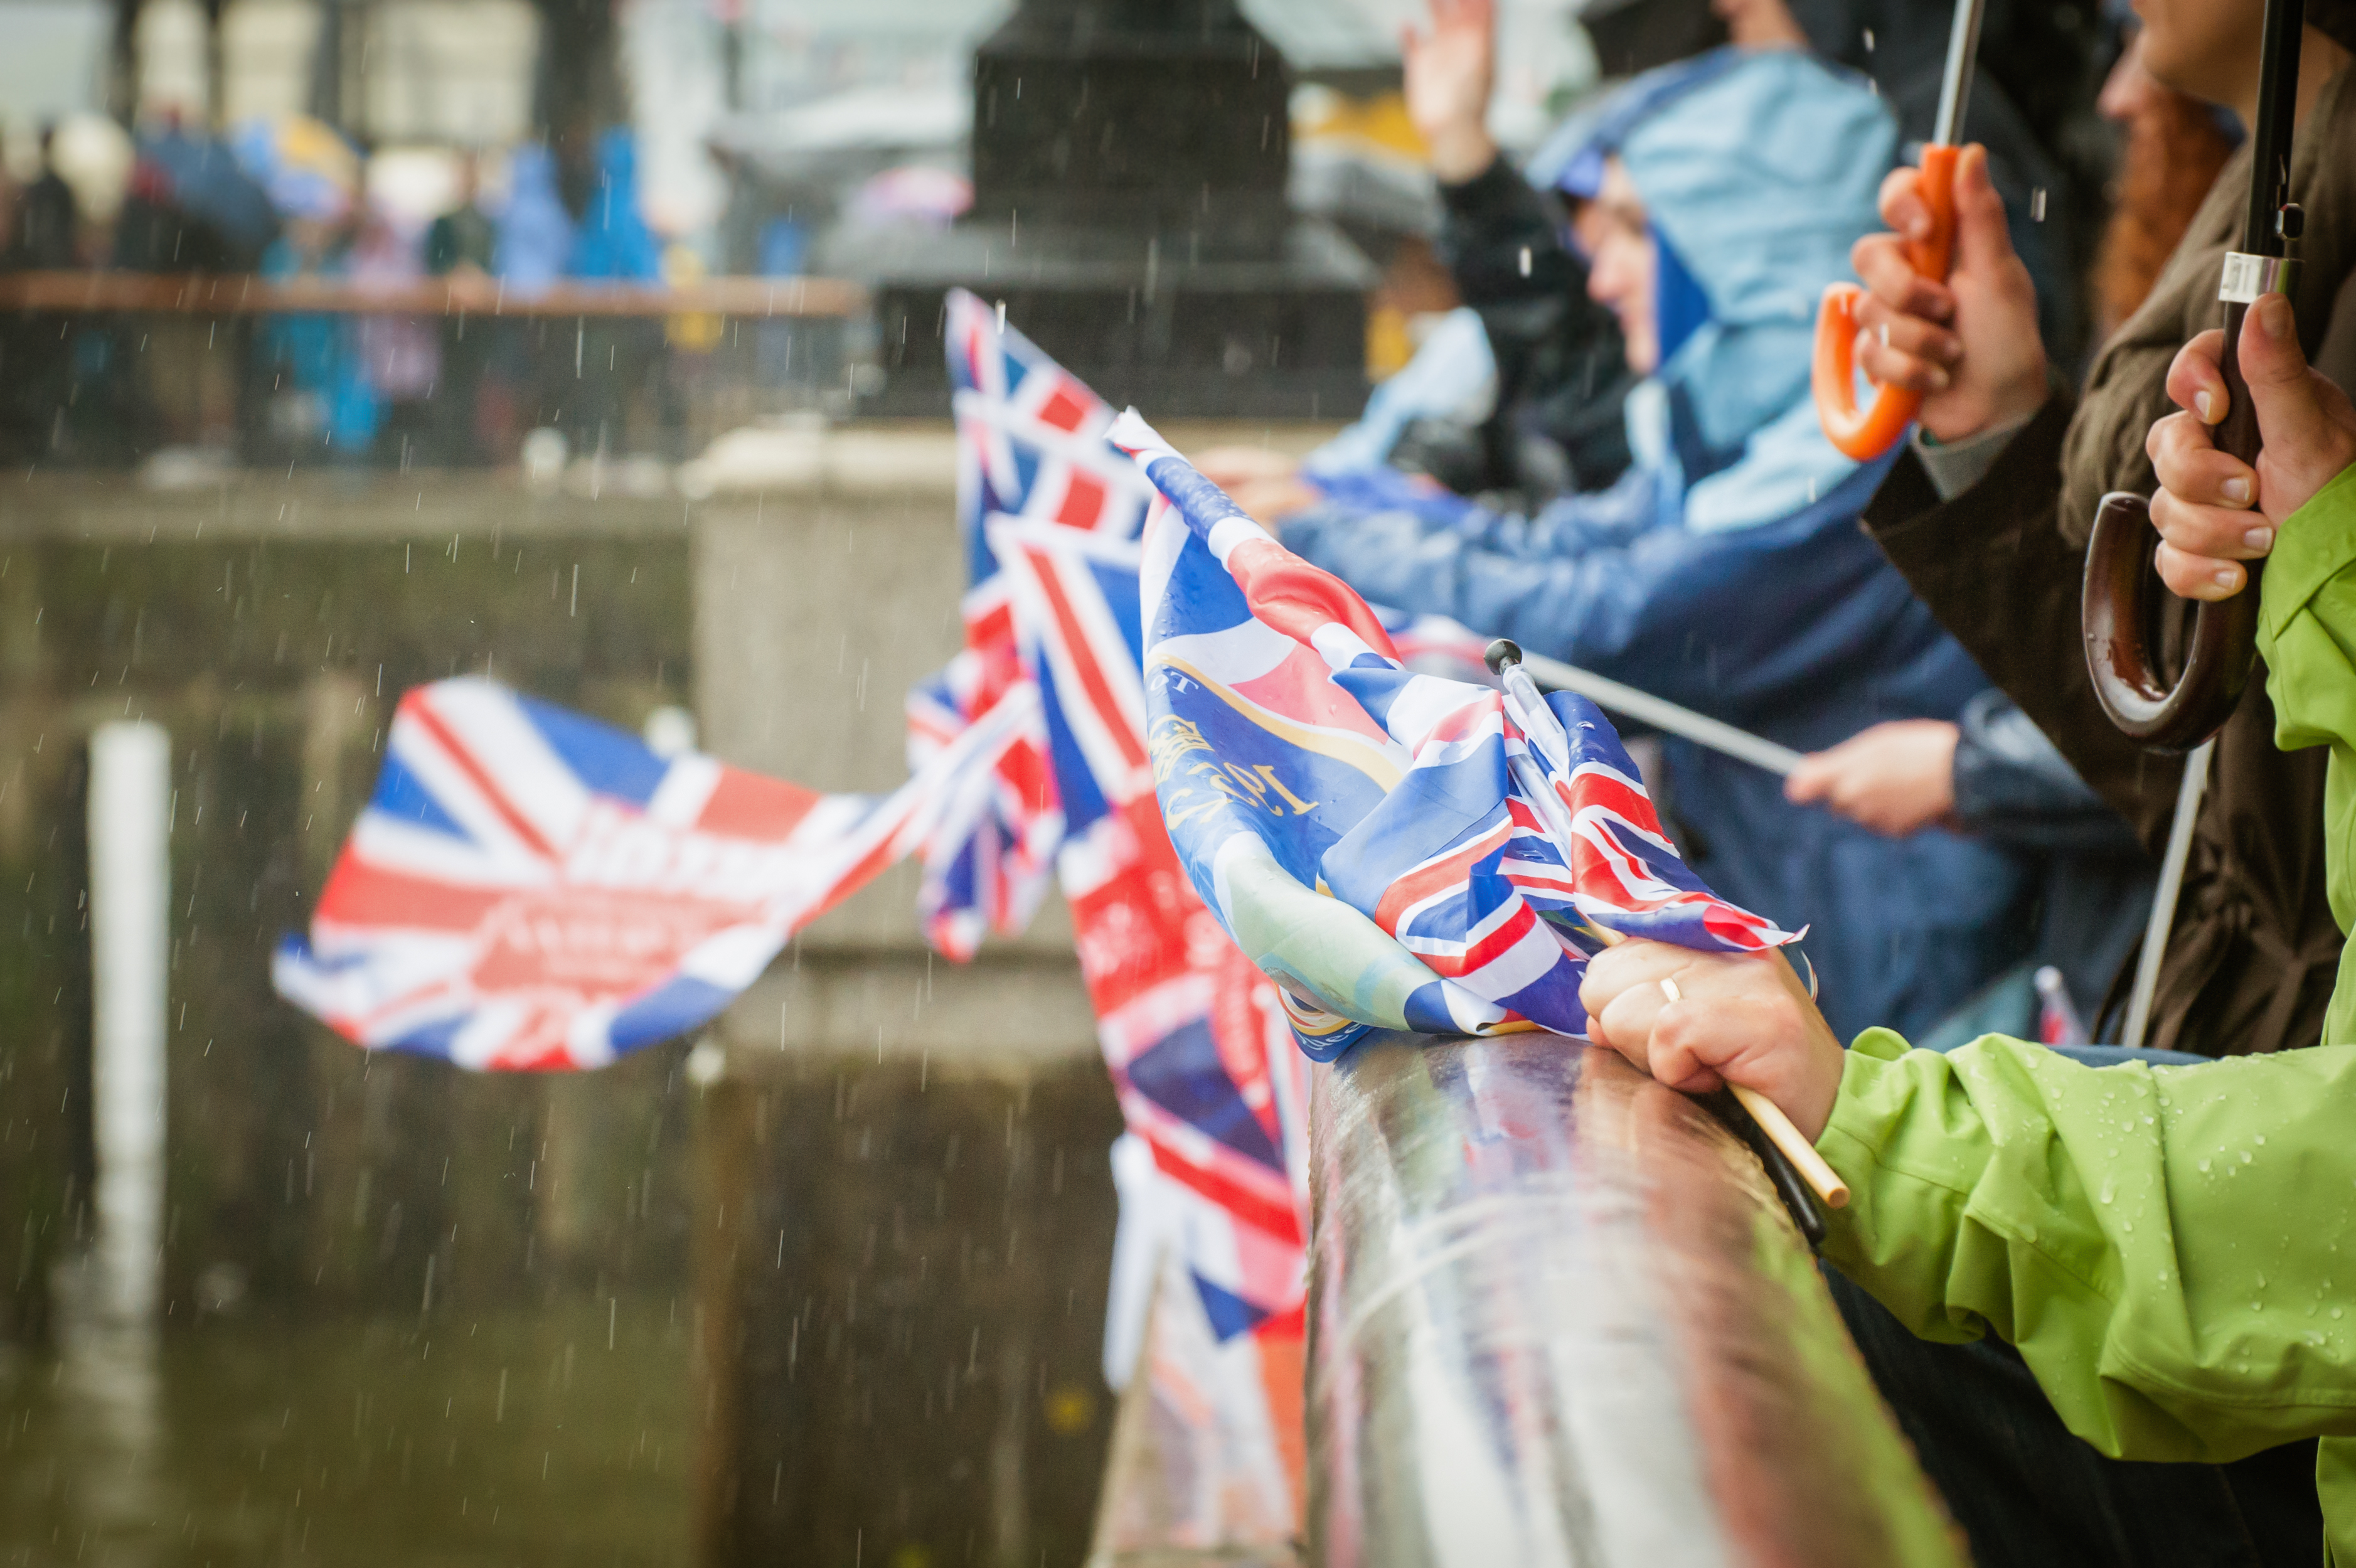 Union Jack flags in the rain